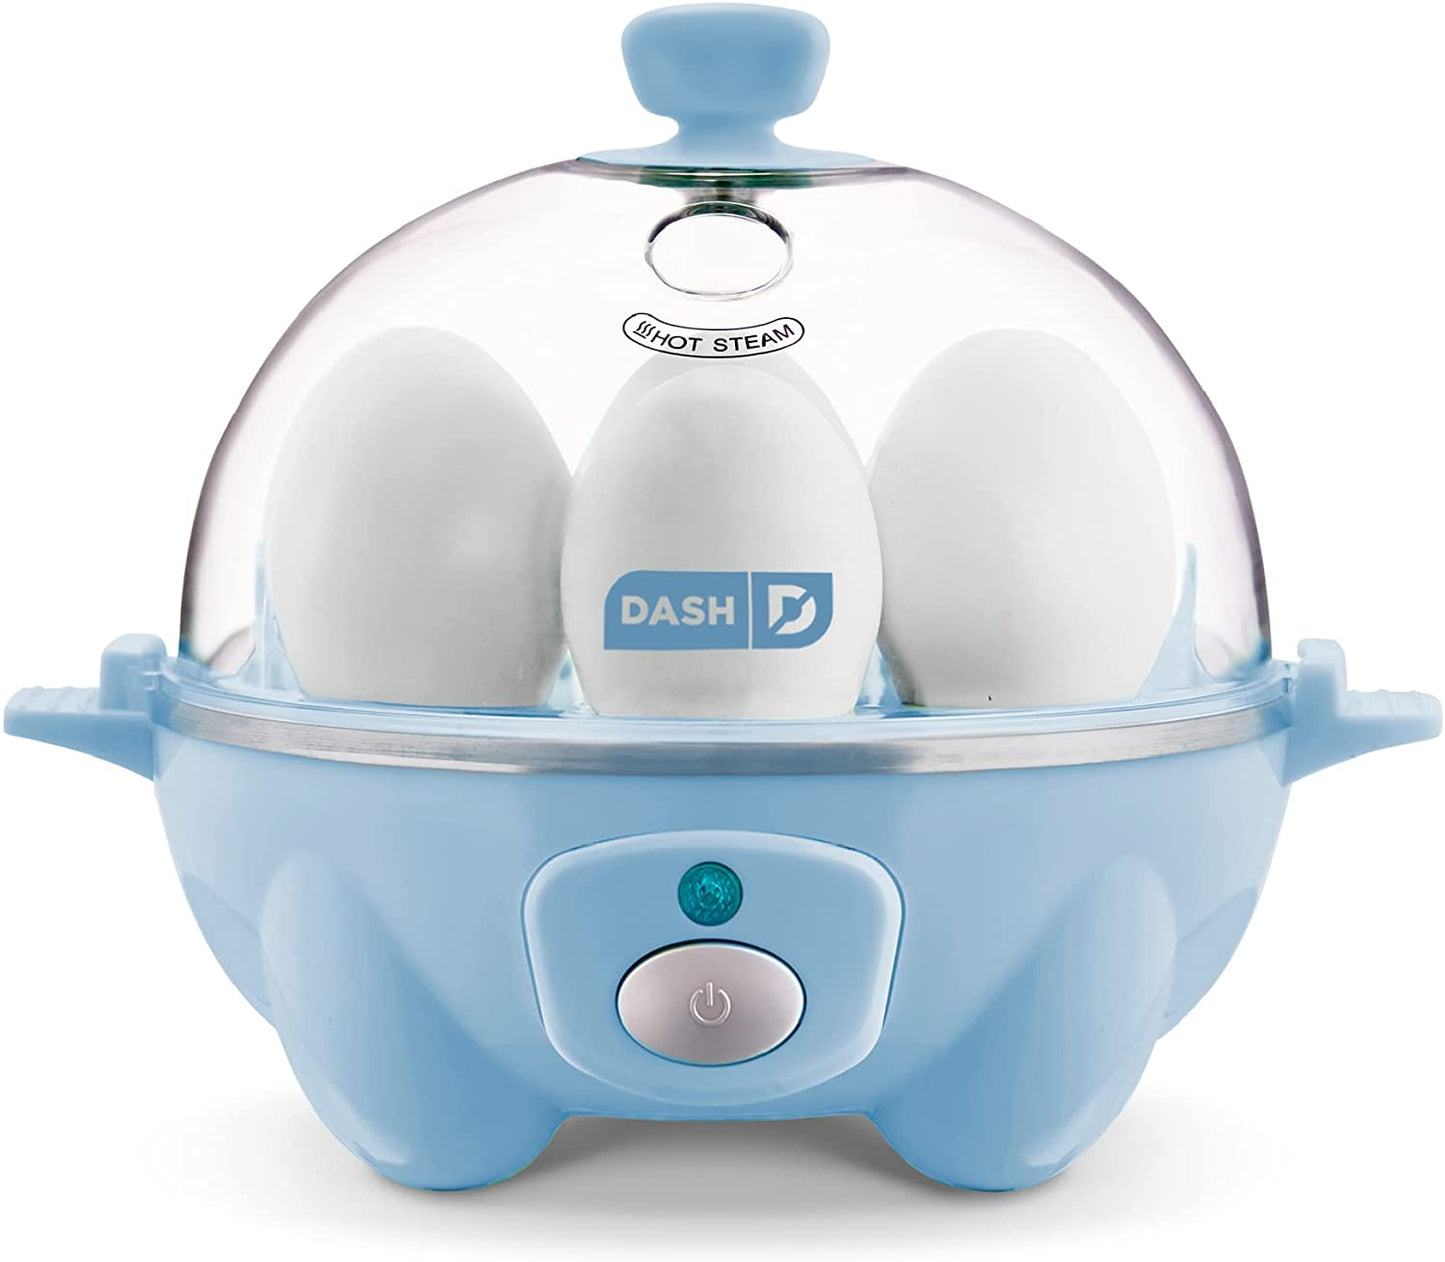 Rapid Egg Cooker: 6 Egg Capacity Electric Egg Cooker for Hard Boiled Eggs, Poached Eggs, Scrambled Eggs, or Omelets with Auto Shut off Feature - Dream Blue